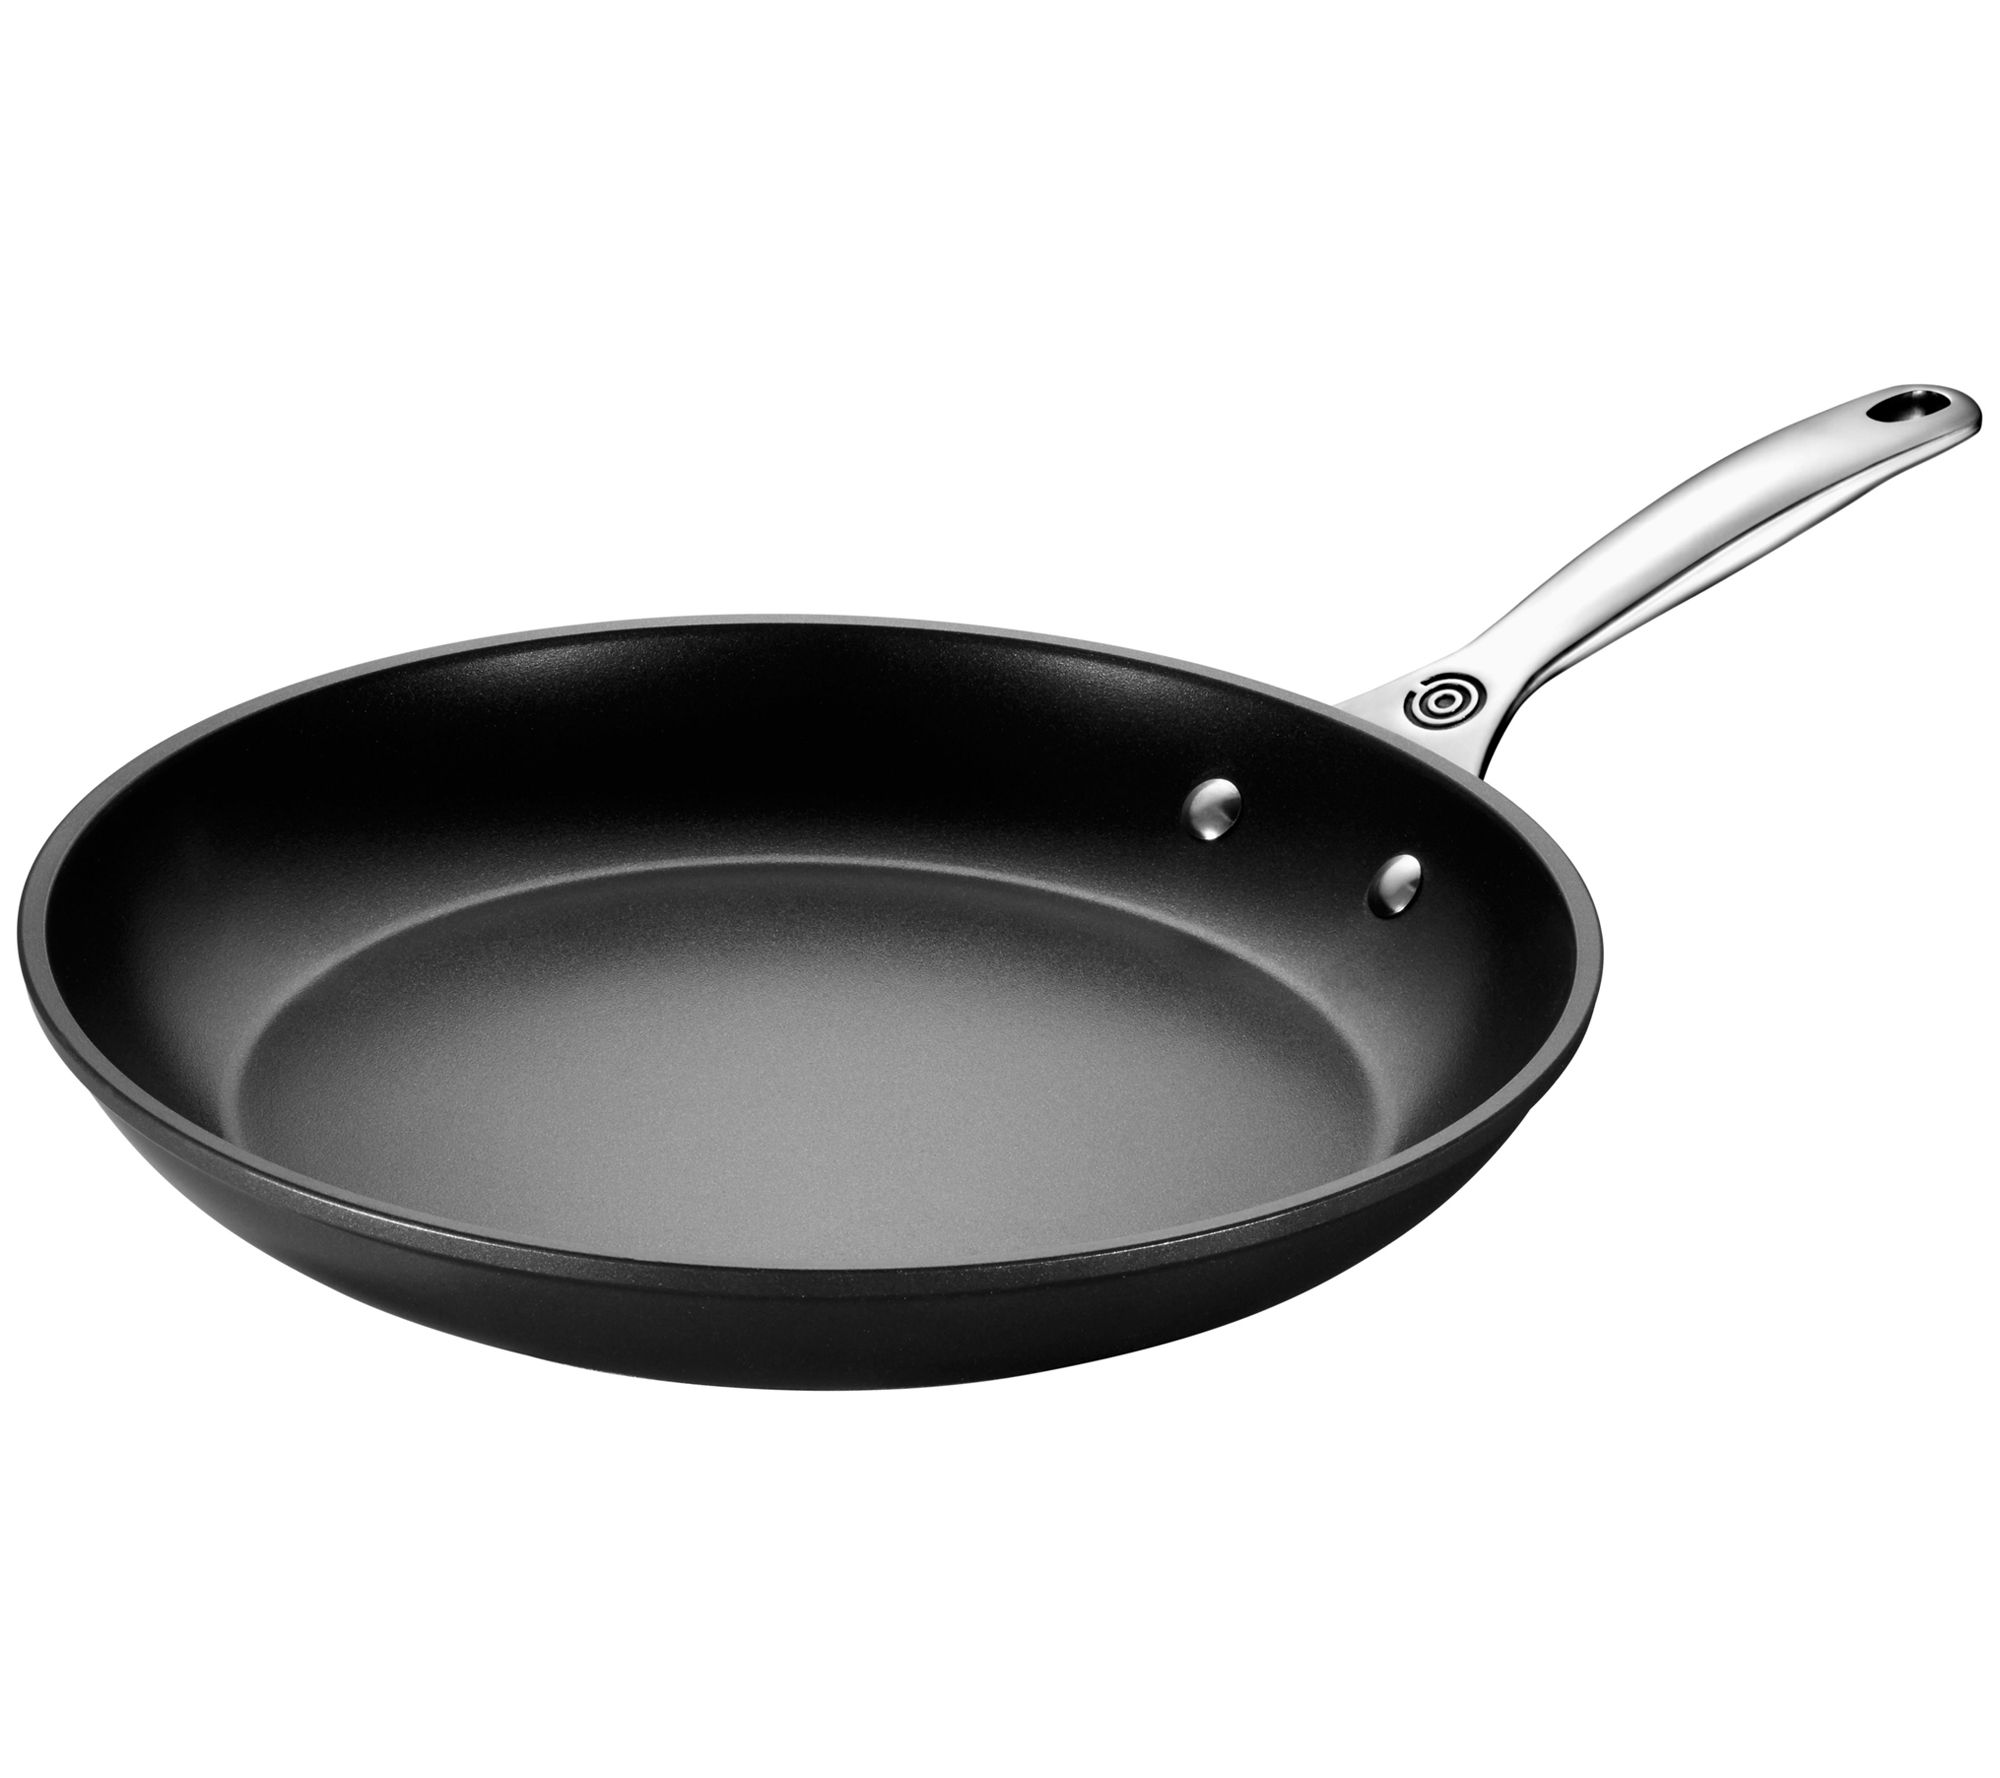 3 Qt. Saucepan with Glass Lid (Toughened Nonstick Pro)